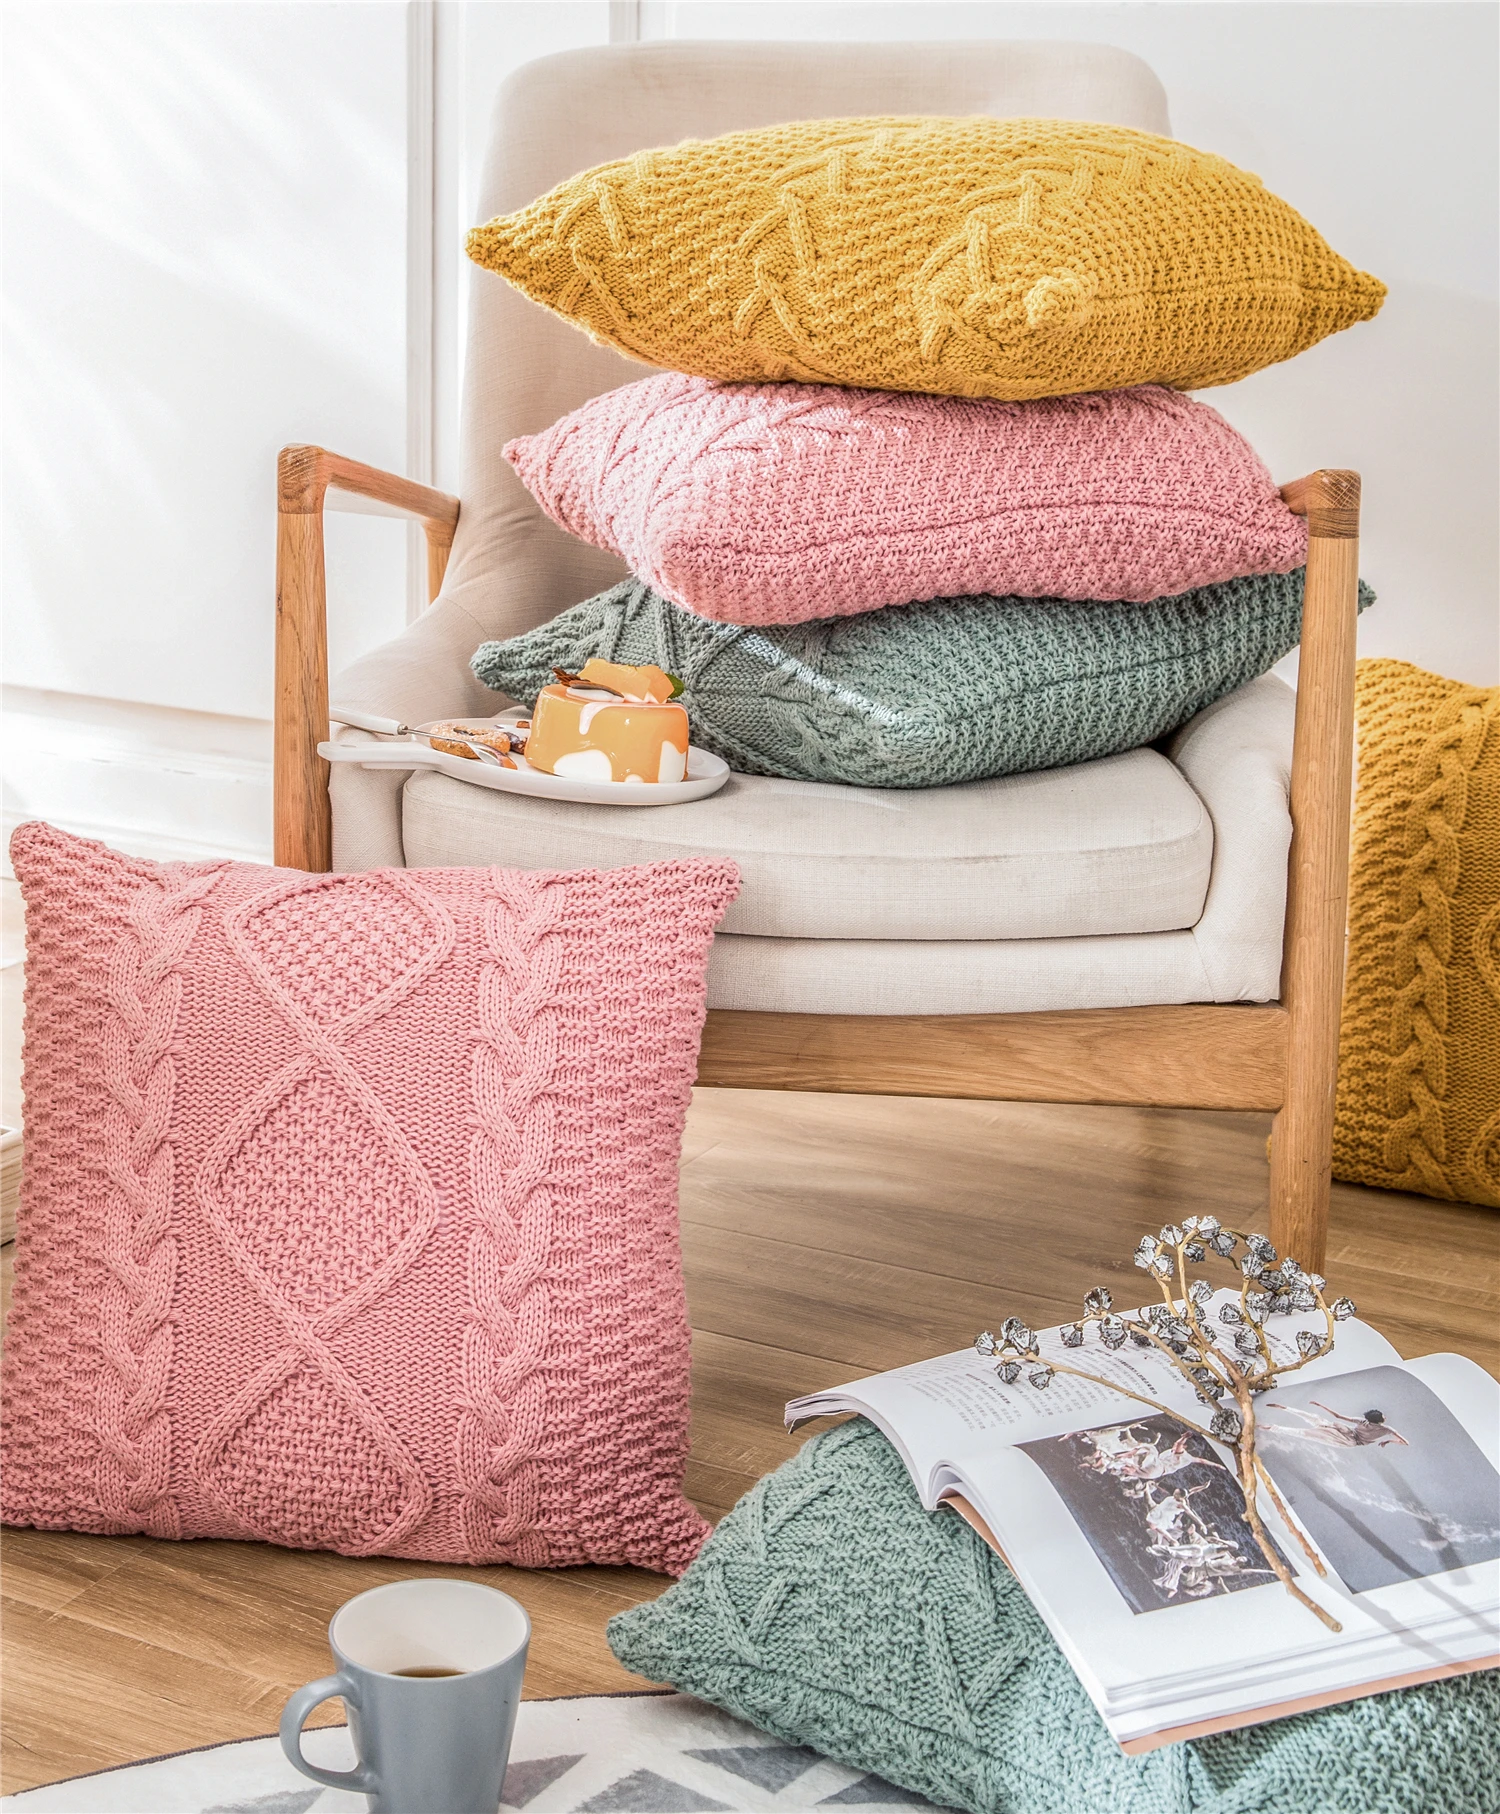 Housse de coussin cocooning style tricot